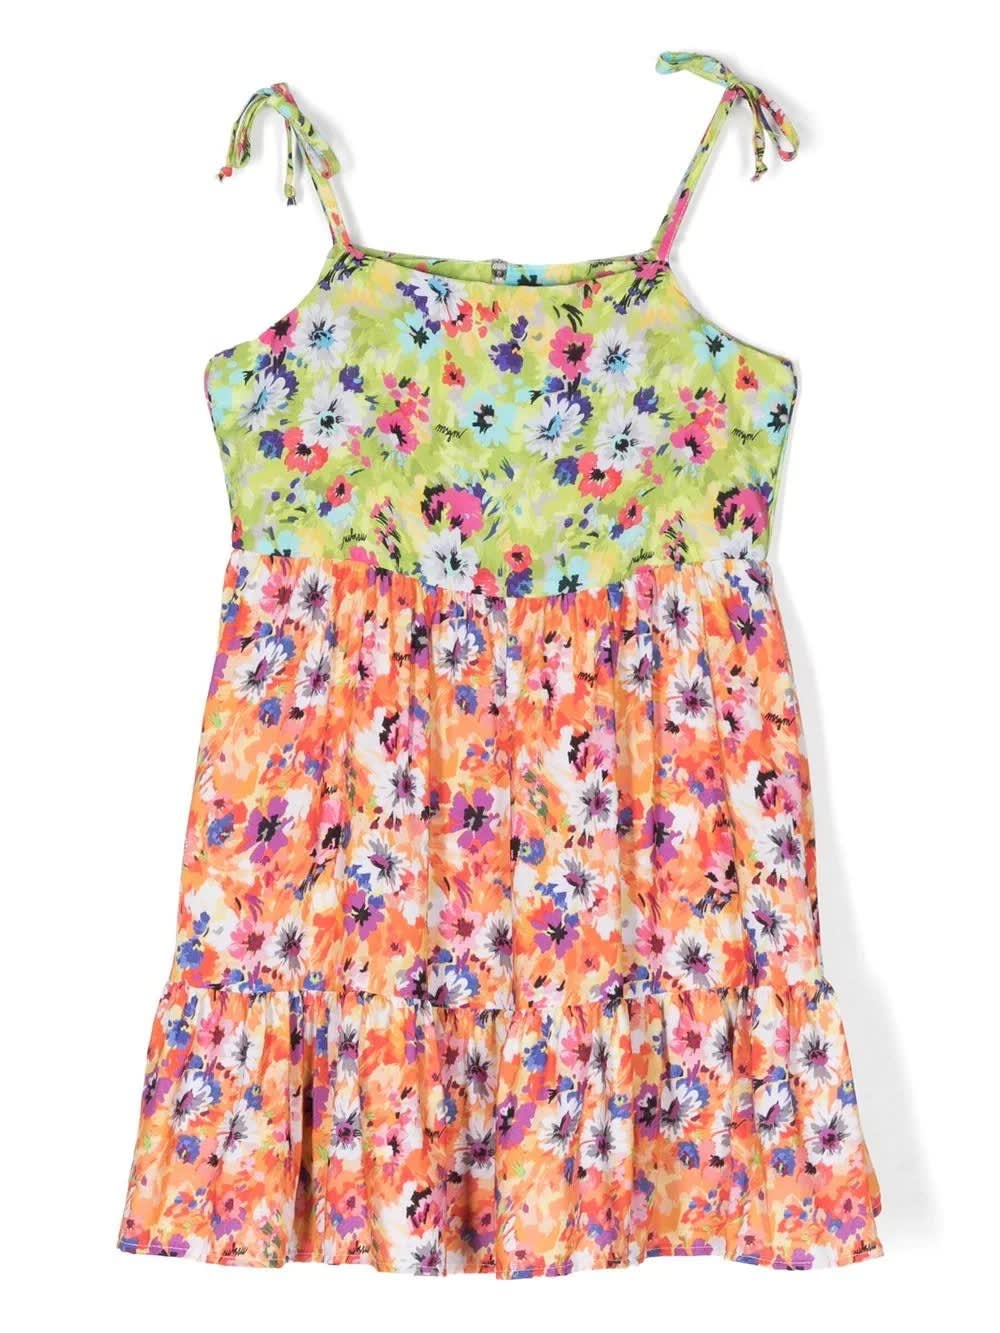 MSGM MULTICOLORED FLORAL SLEEVELESS DRESS